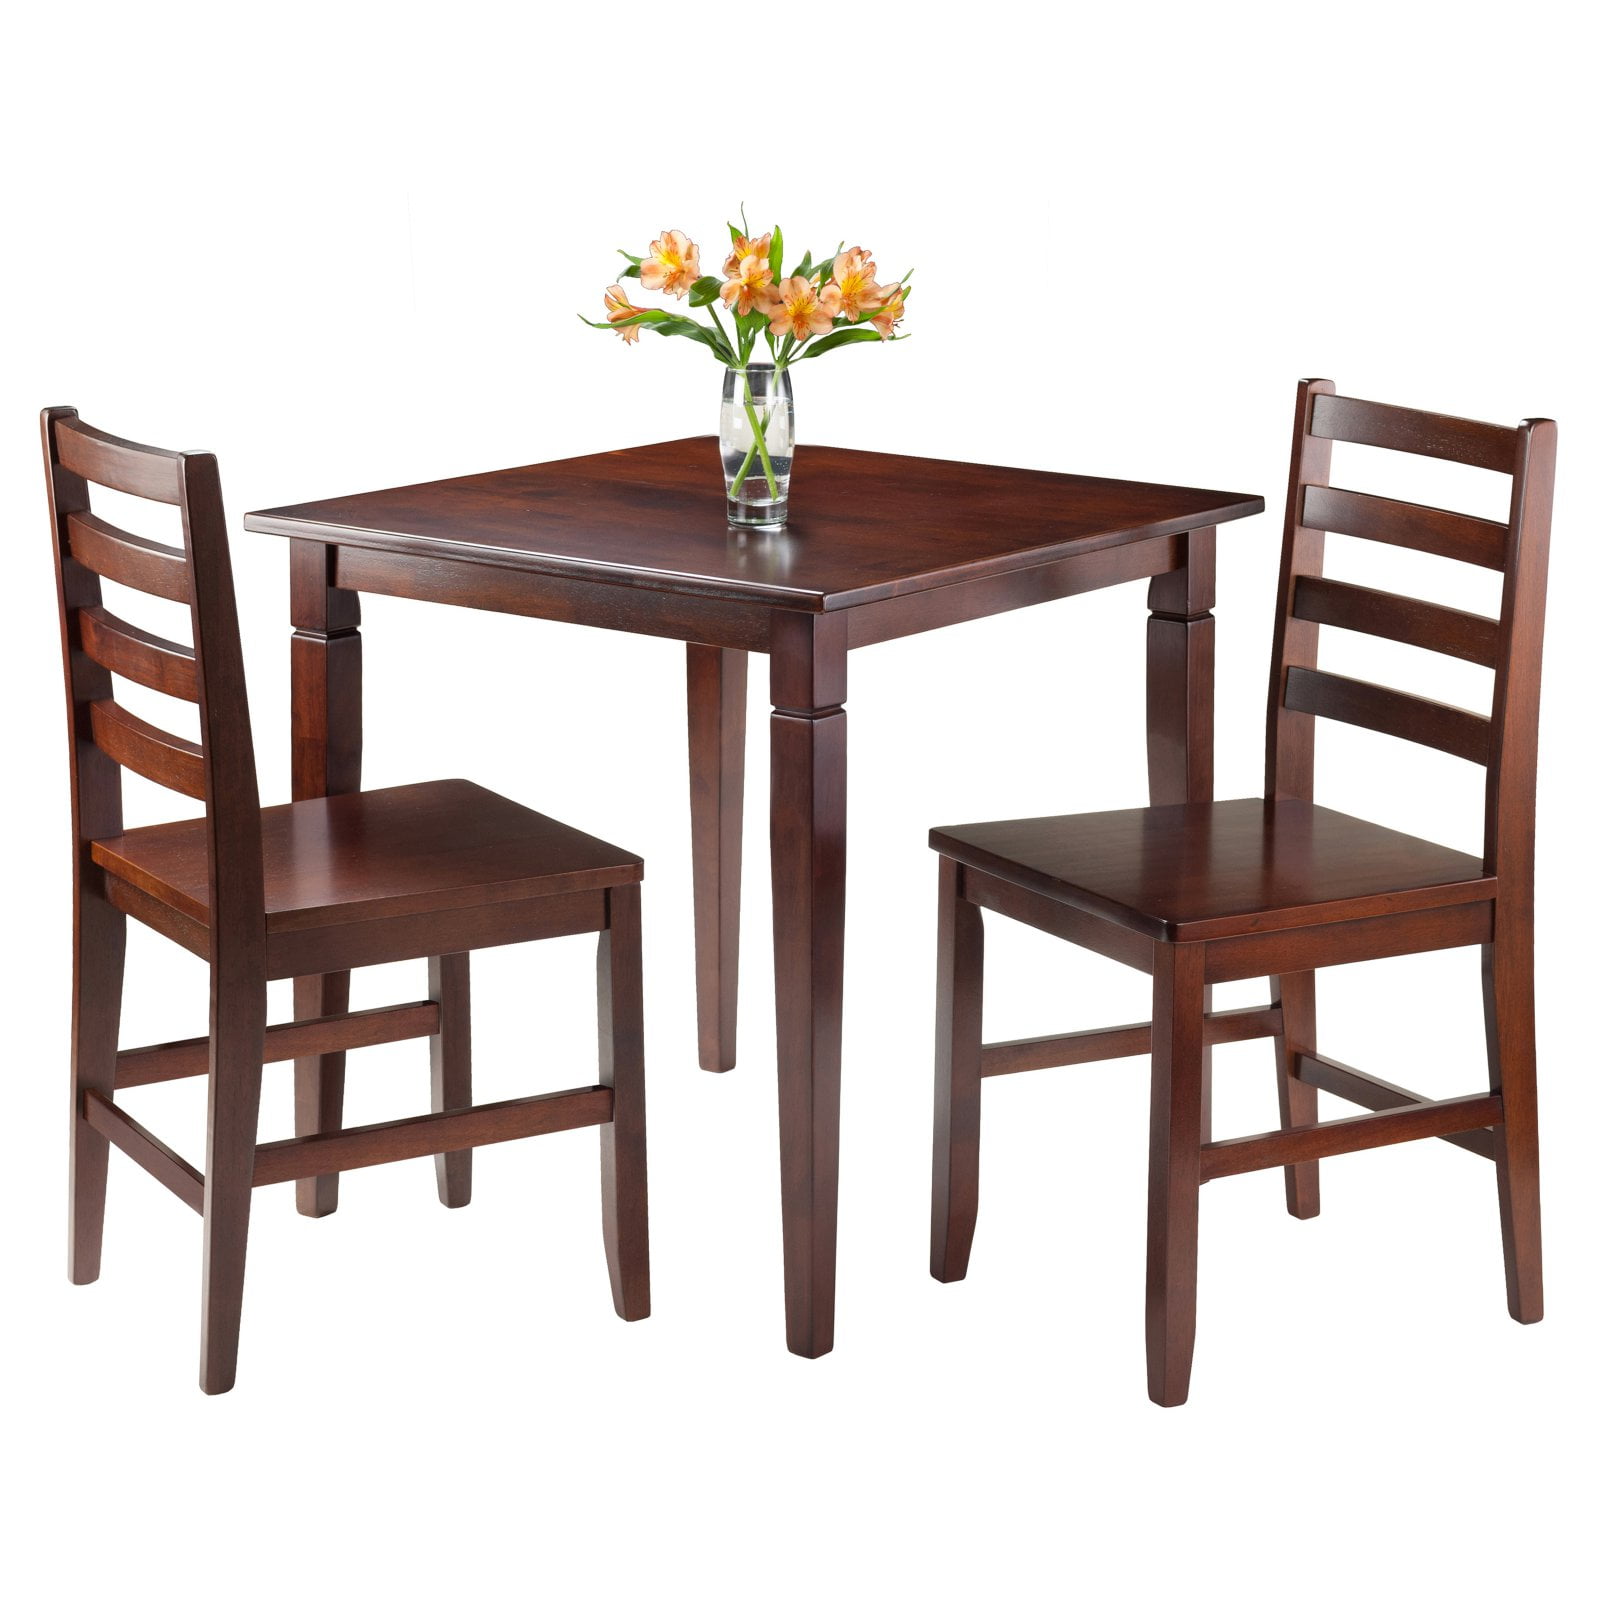 Kingsgate 3 Pc Dinning Table With 2 Hamilton Ladder Back Chairs